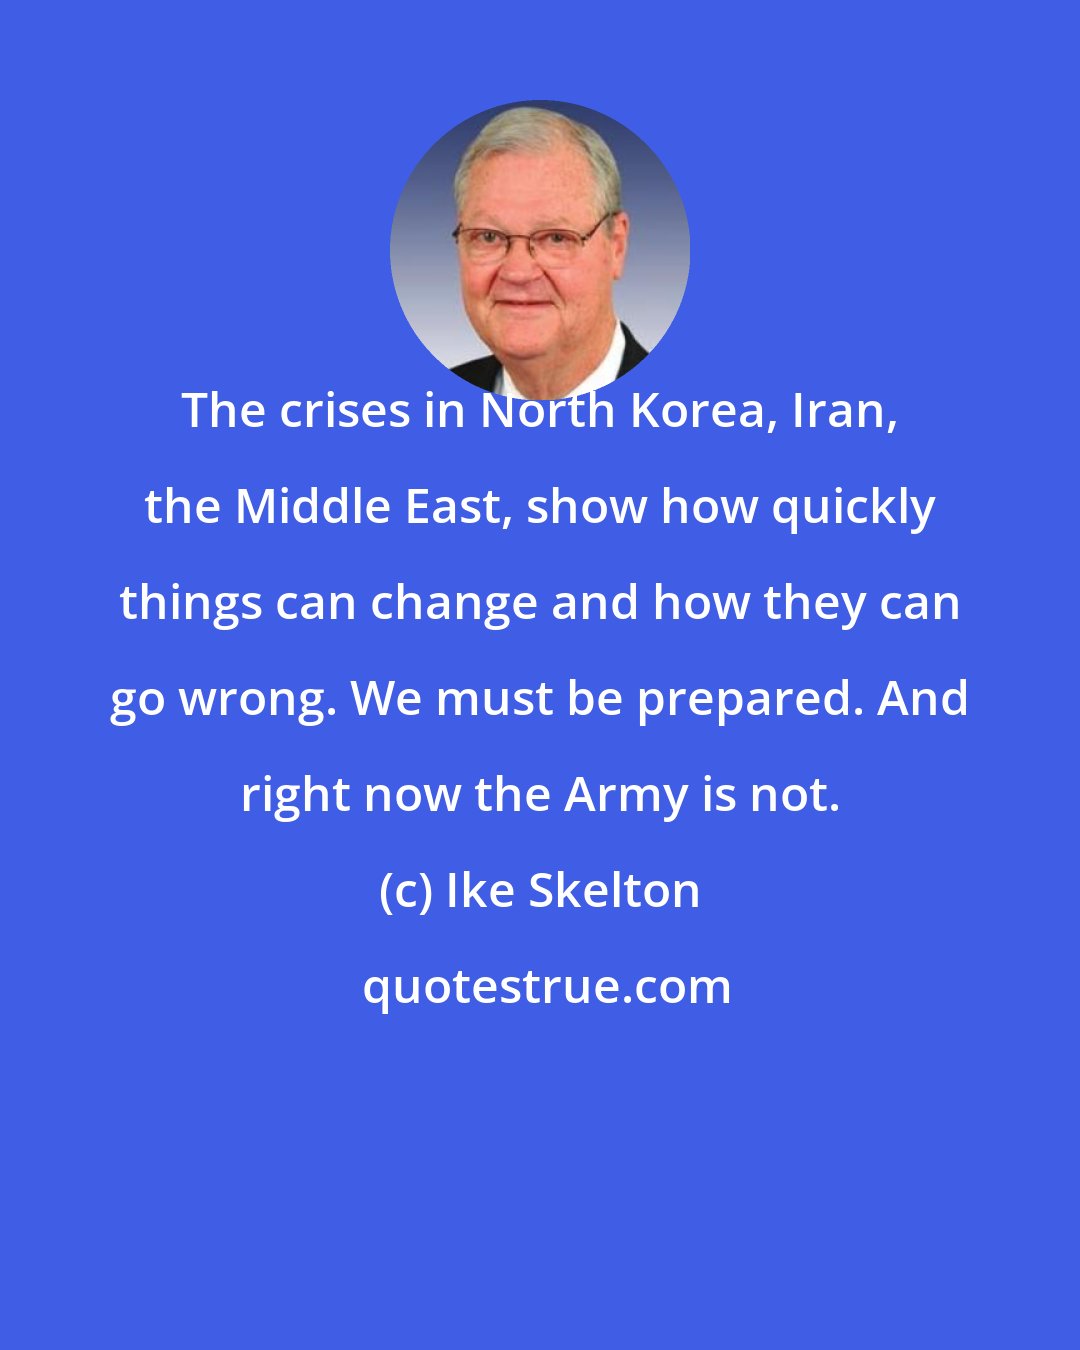 Ike Skelton: The crises in North Korea, Iran, the Middle East, show how quickly things can change and how they can go wrong. We must be prepared. And right now the Army is not.